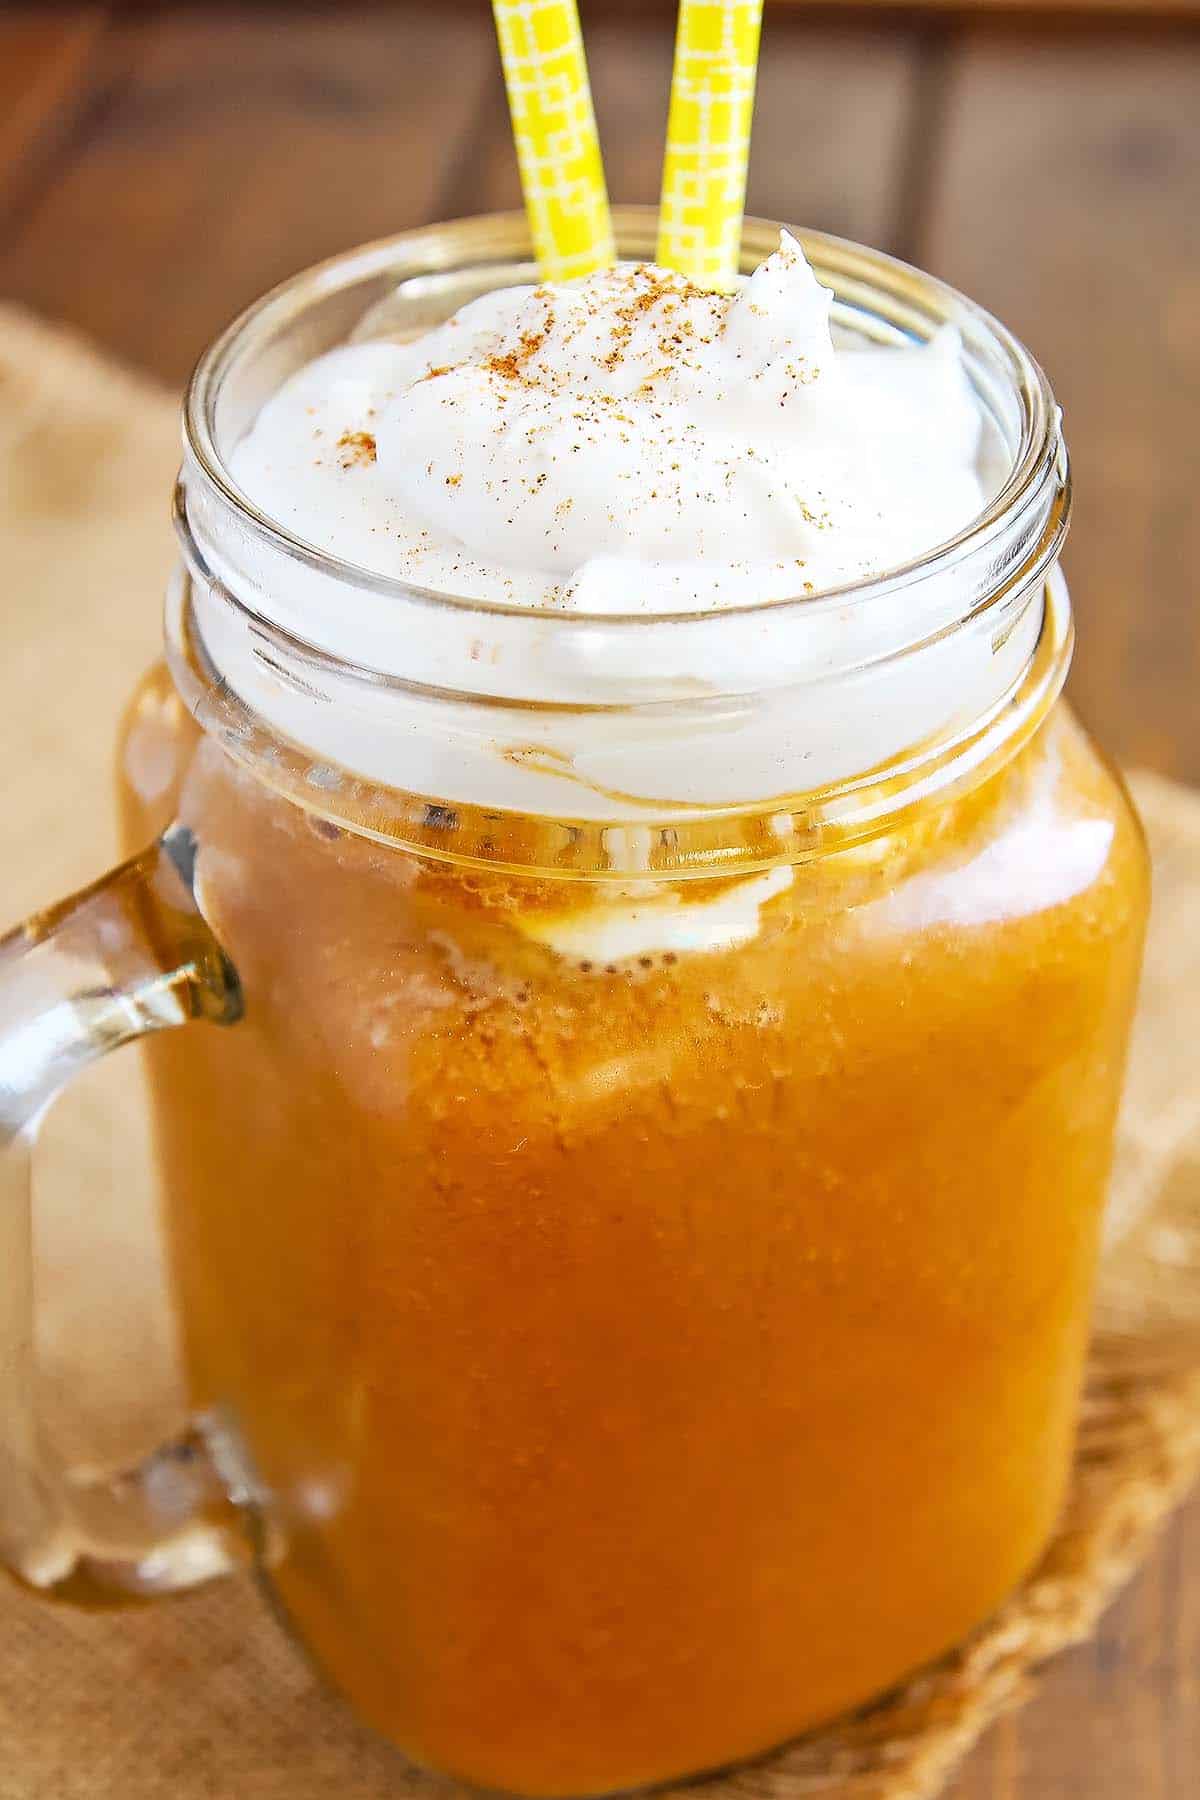 starbucks pumpkin spice frappuccino blended drink in mason glass with whipped cream topping and yellow straws